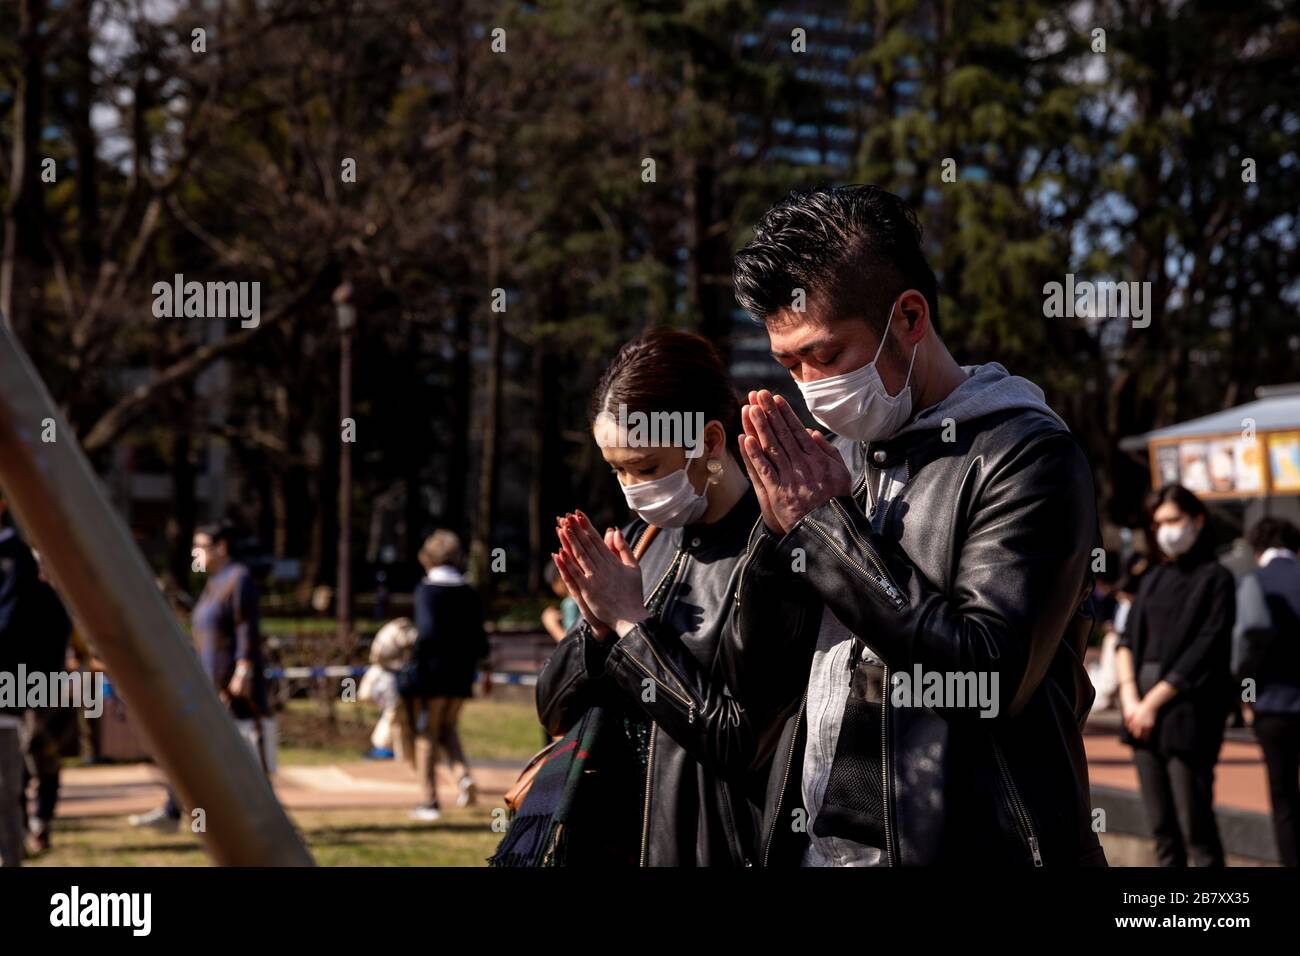 A couple wearing masks as a preventive measure, praying at the 9th anniversary of the 311 mega-earthquake and tsunami during the corona virus pandemic.Concerns are growing about the increasing cases of Coronavirus (COVID-19) in Japan. Many countries have closed borders to Japan and the growing epidemic has caught public attention on the true number of coronavirus cases in Japan that could be much higher. Stock Photo